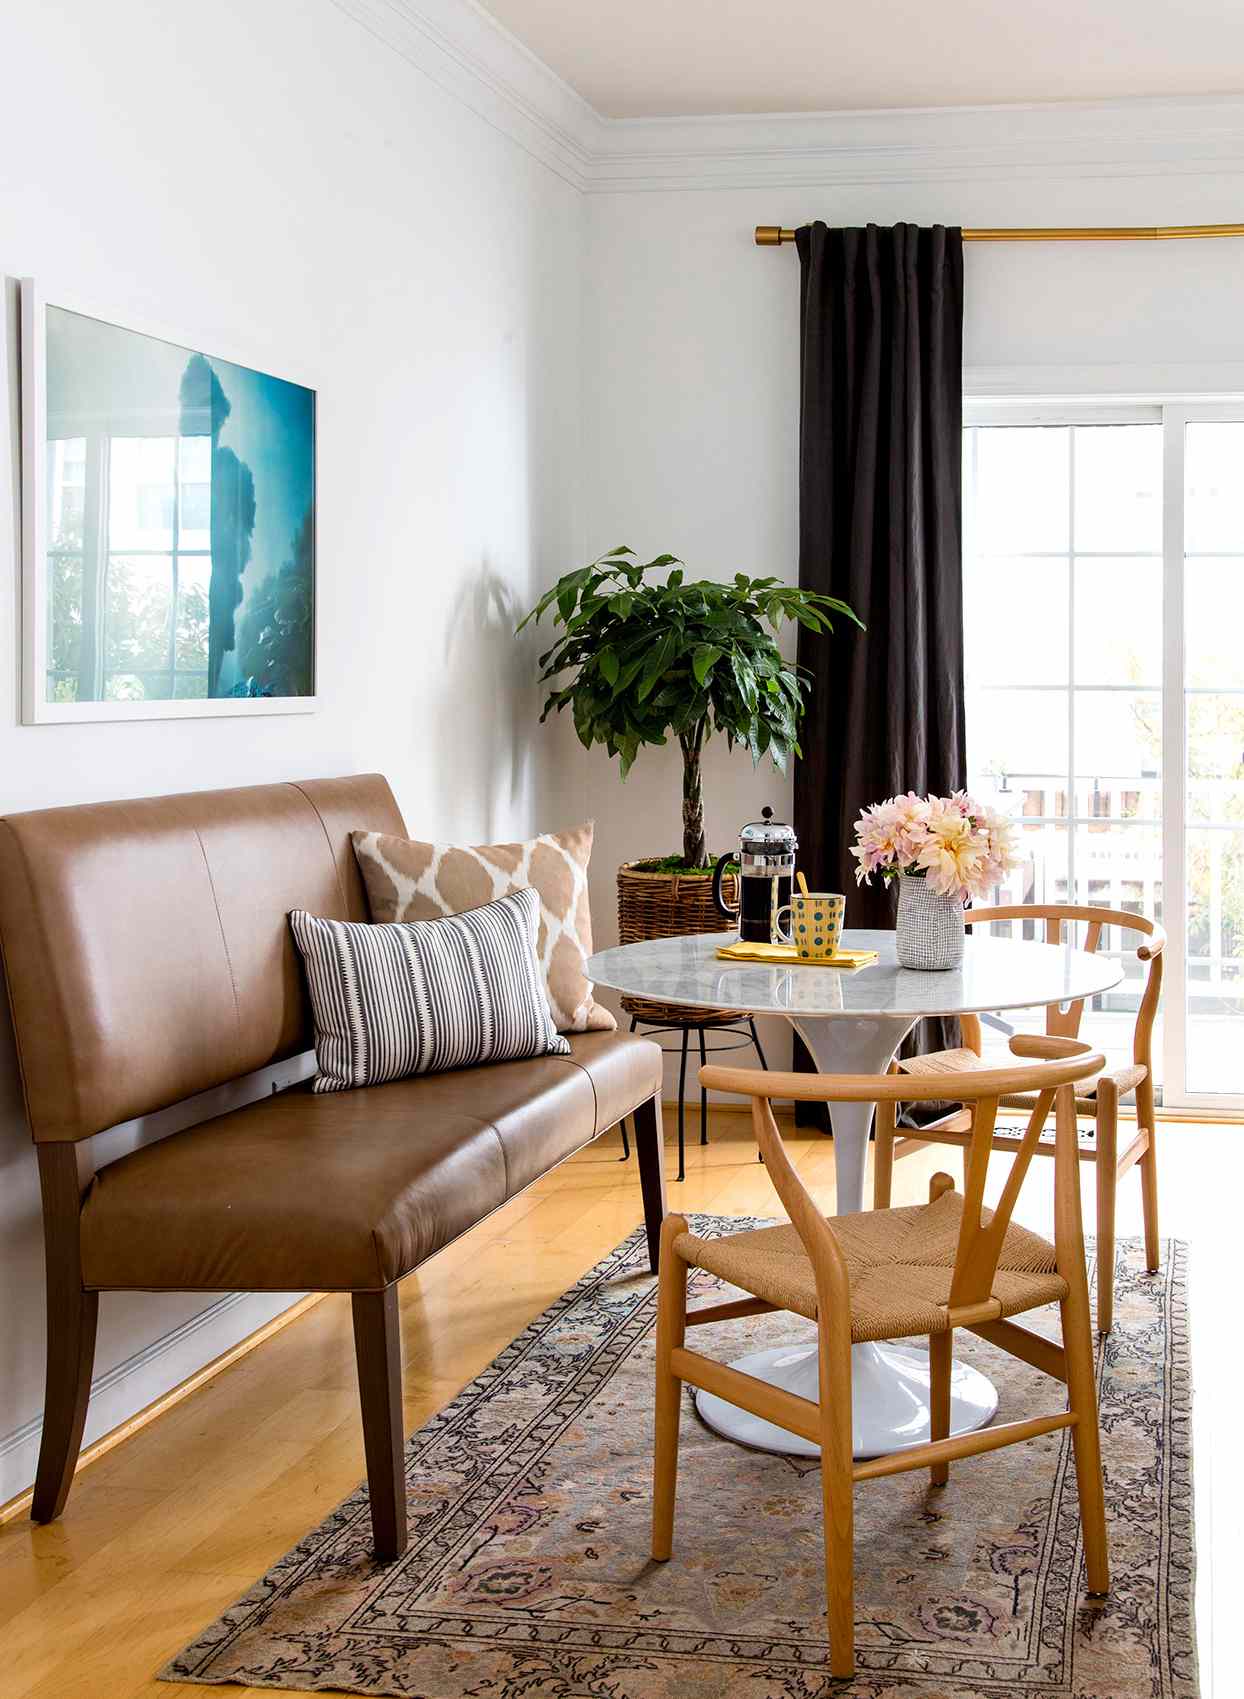 15 Small Dining Room Ideas To Make The, Dining Room Table For Small Spaces